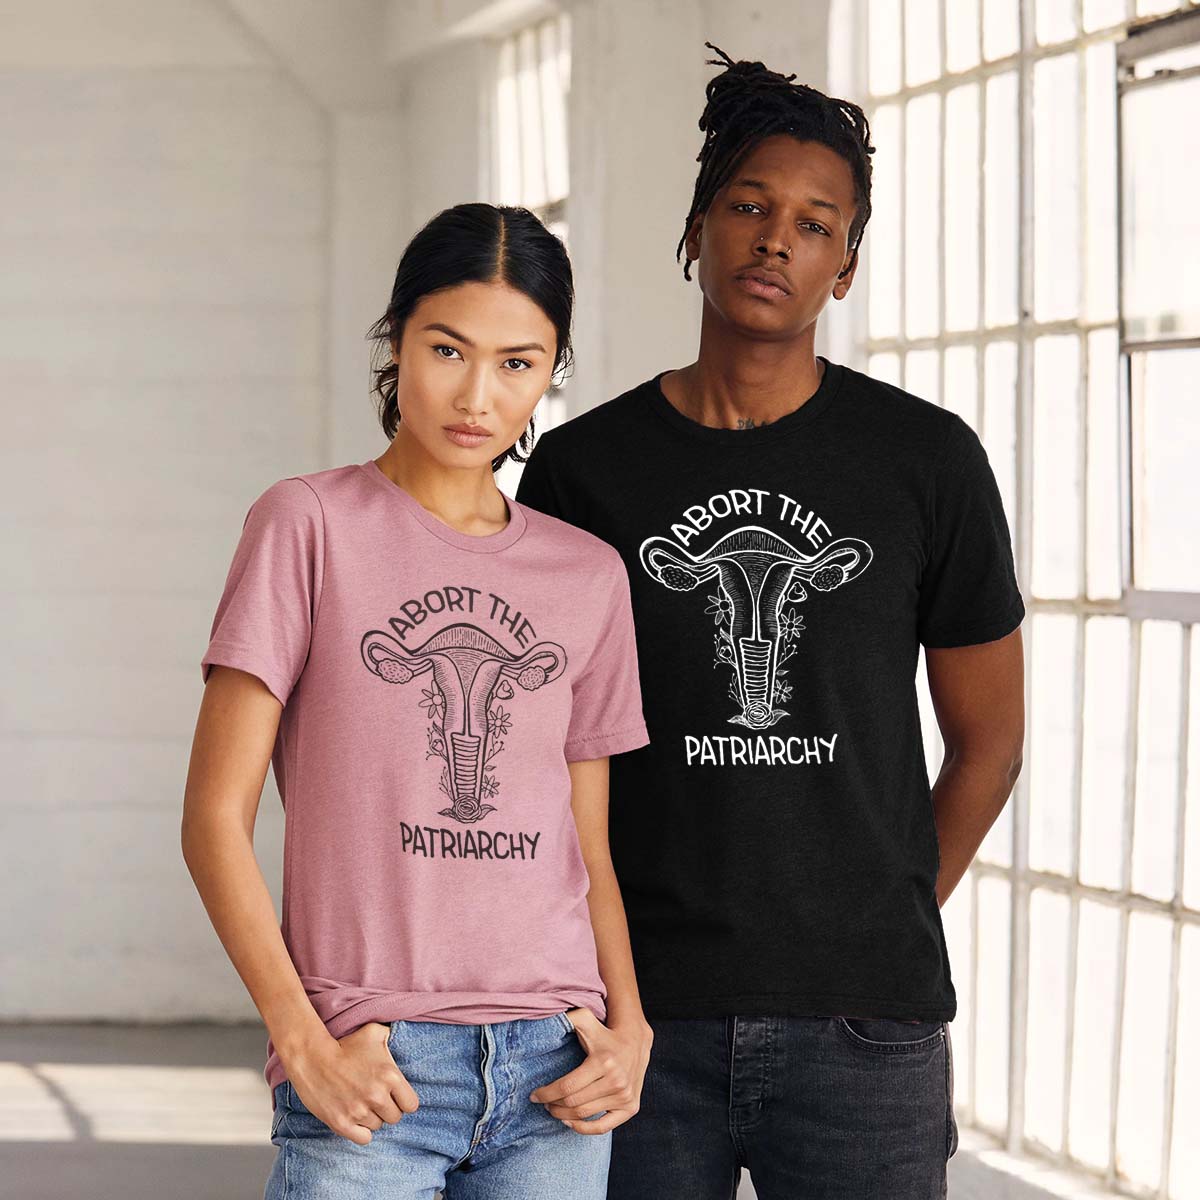 an asian woman wearing an orchid colored t-shirt with a white screen printed floral uterus graphic and "abort the patriarchy" text  standing next to a black man wearing a black t-shirt with a white screen printed floral uterus graphic and "abort the patriarchy" text